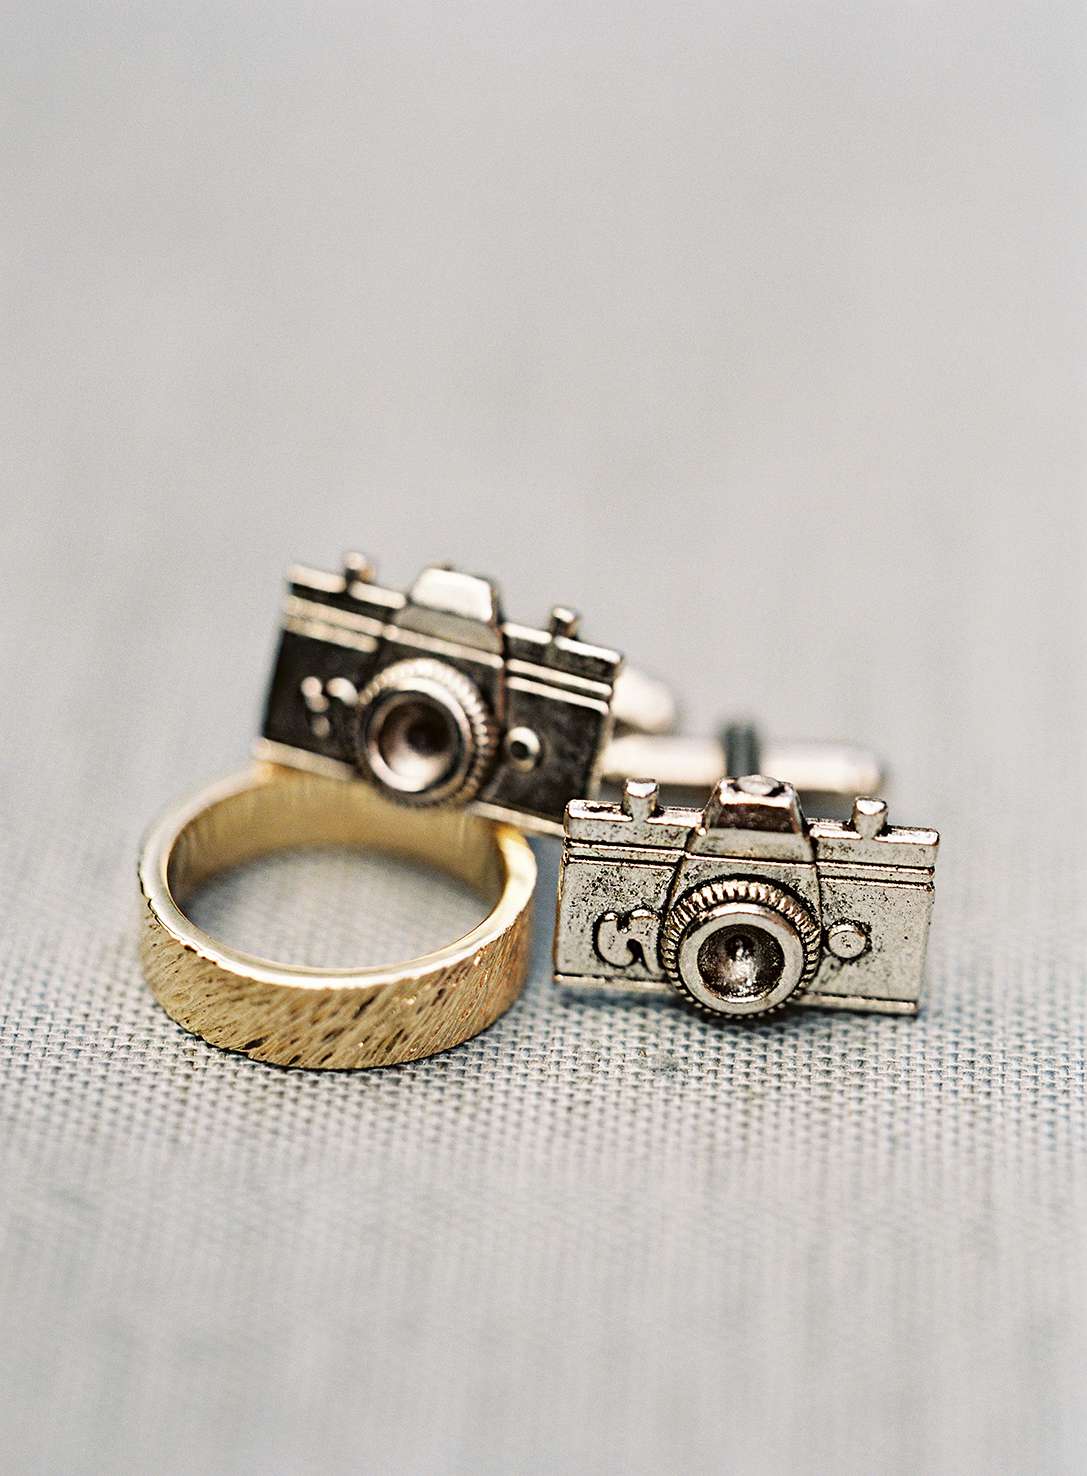 ashley and justin grooms cufflinks